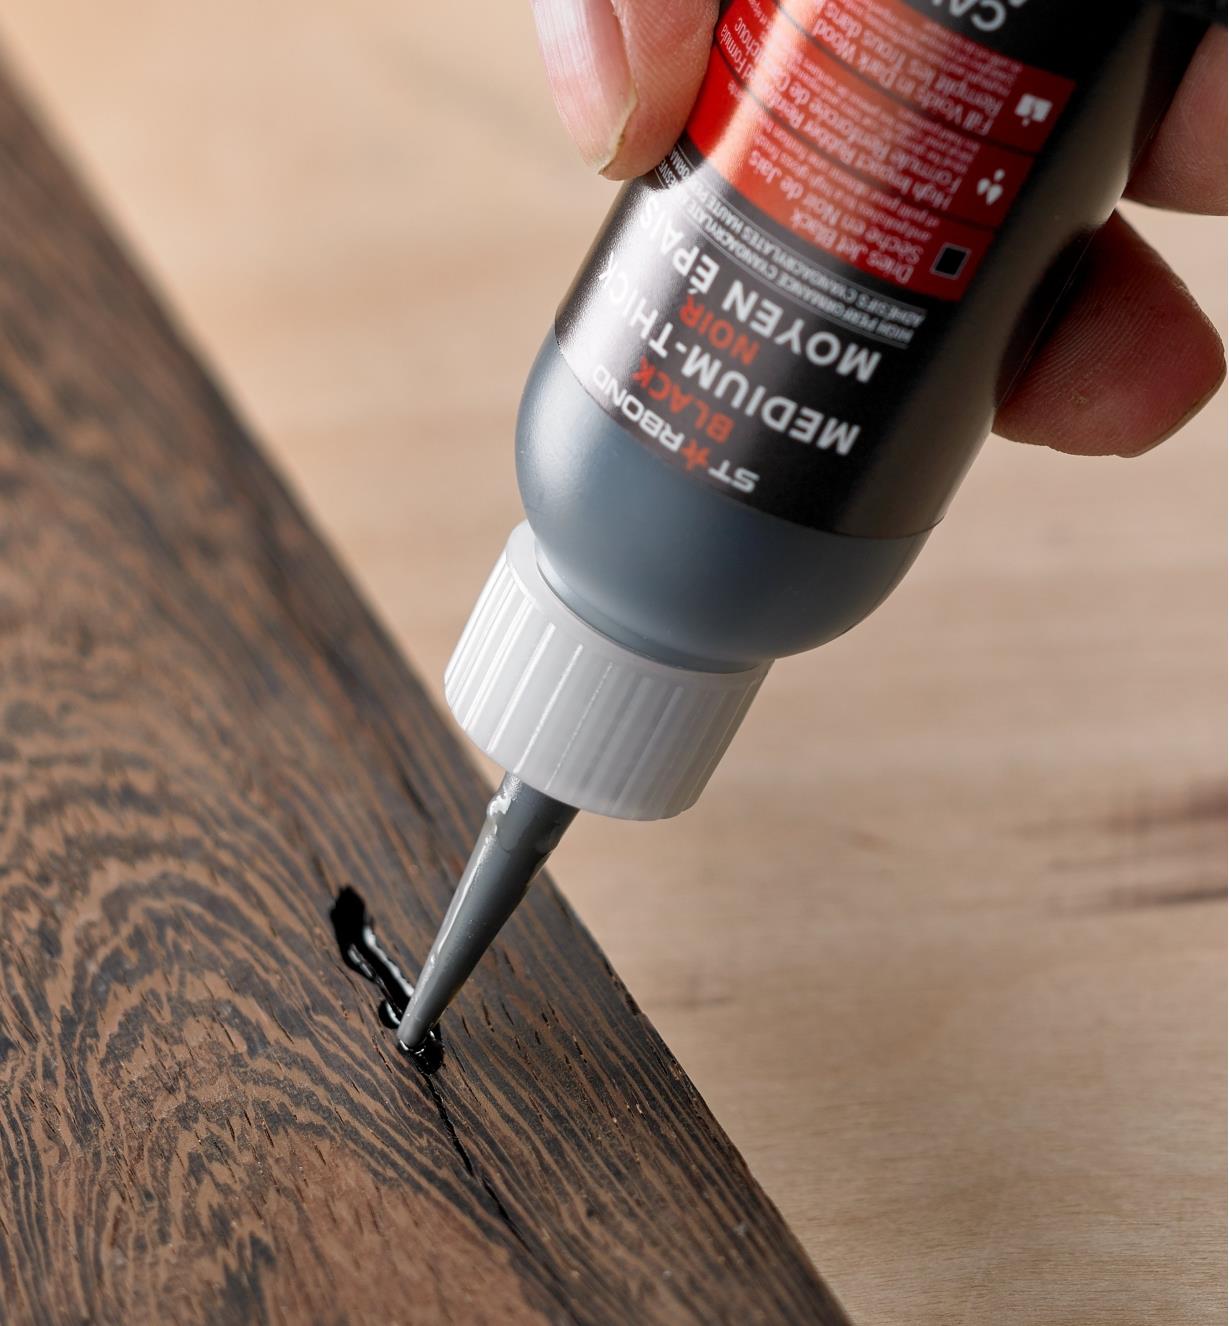 Applying Starbond black CA glue to a crack in a dark wood surface